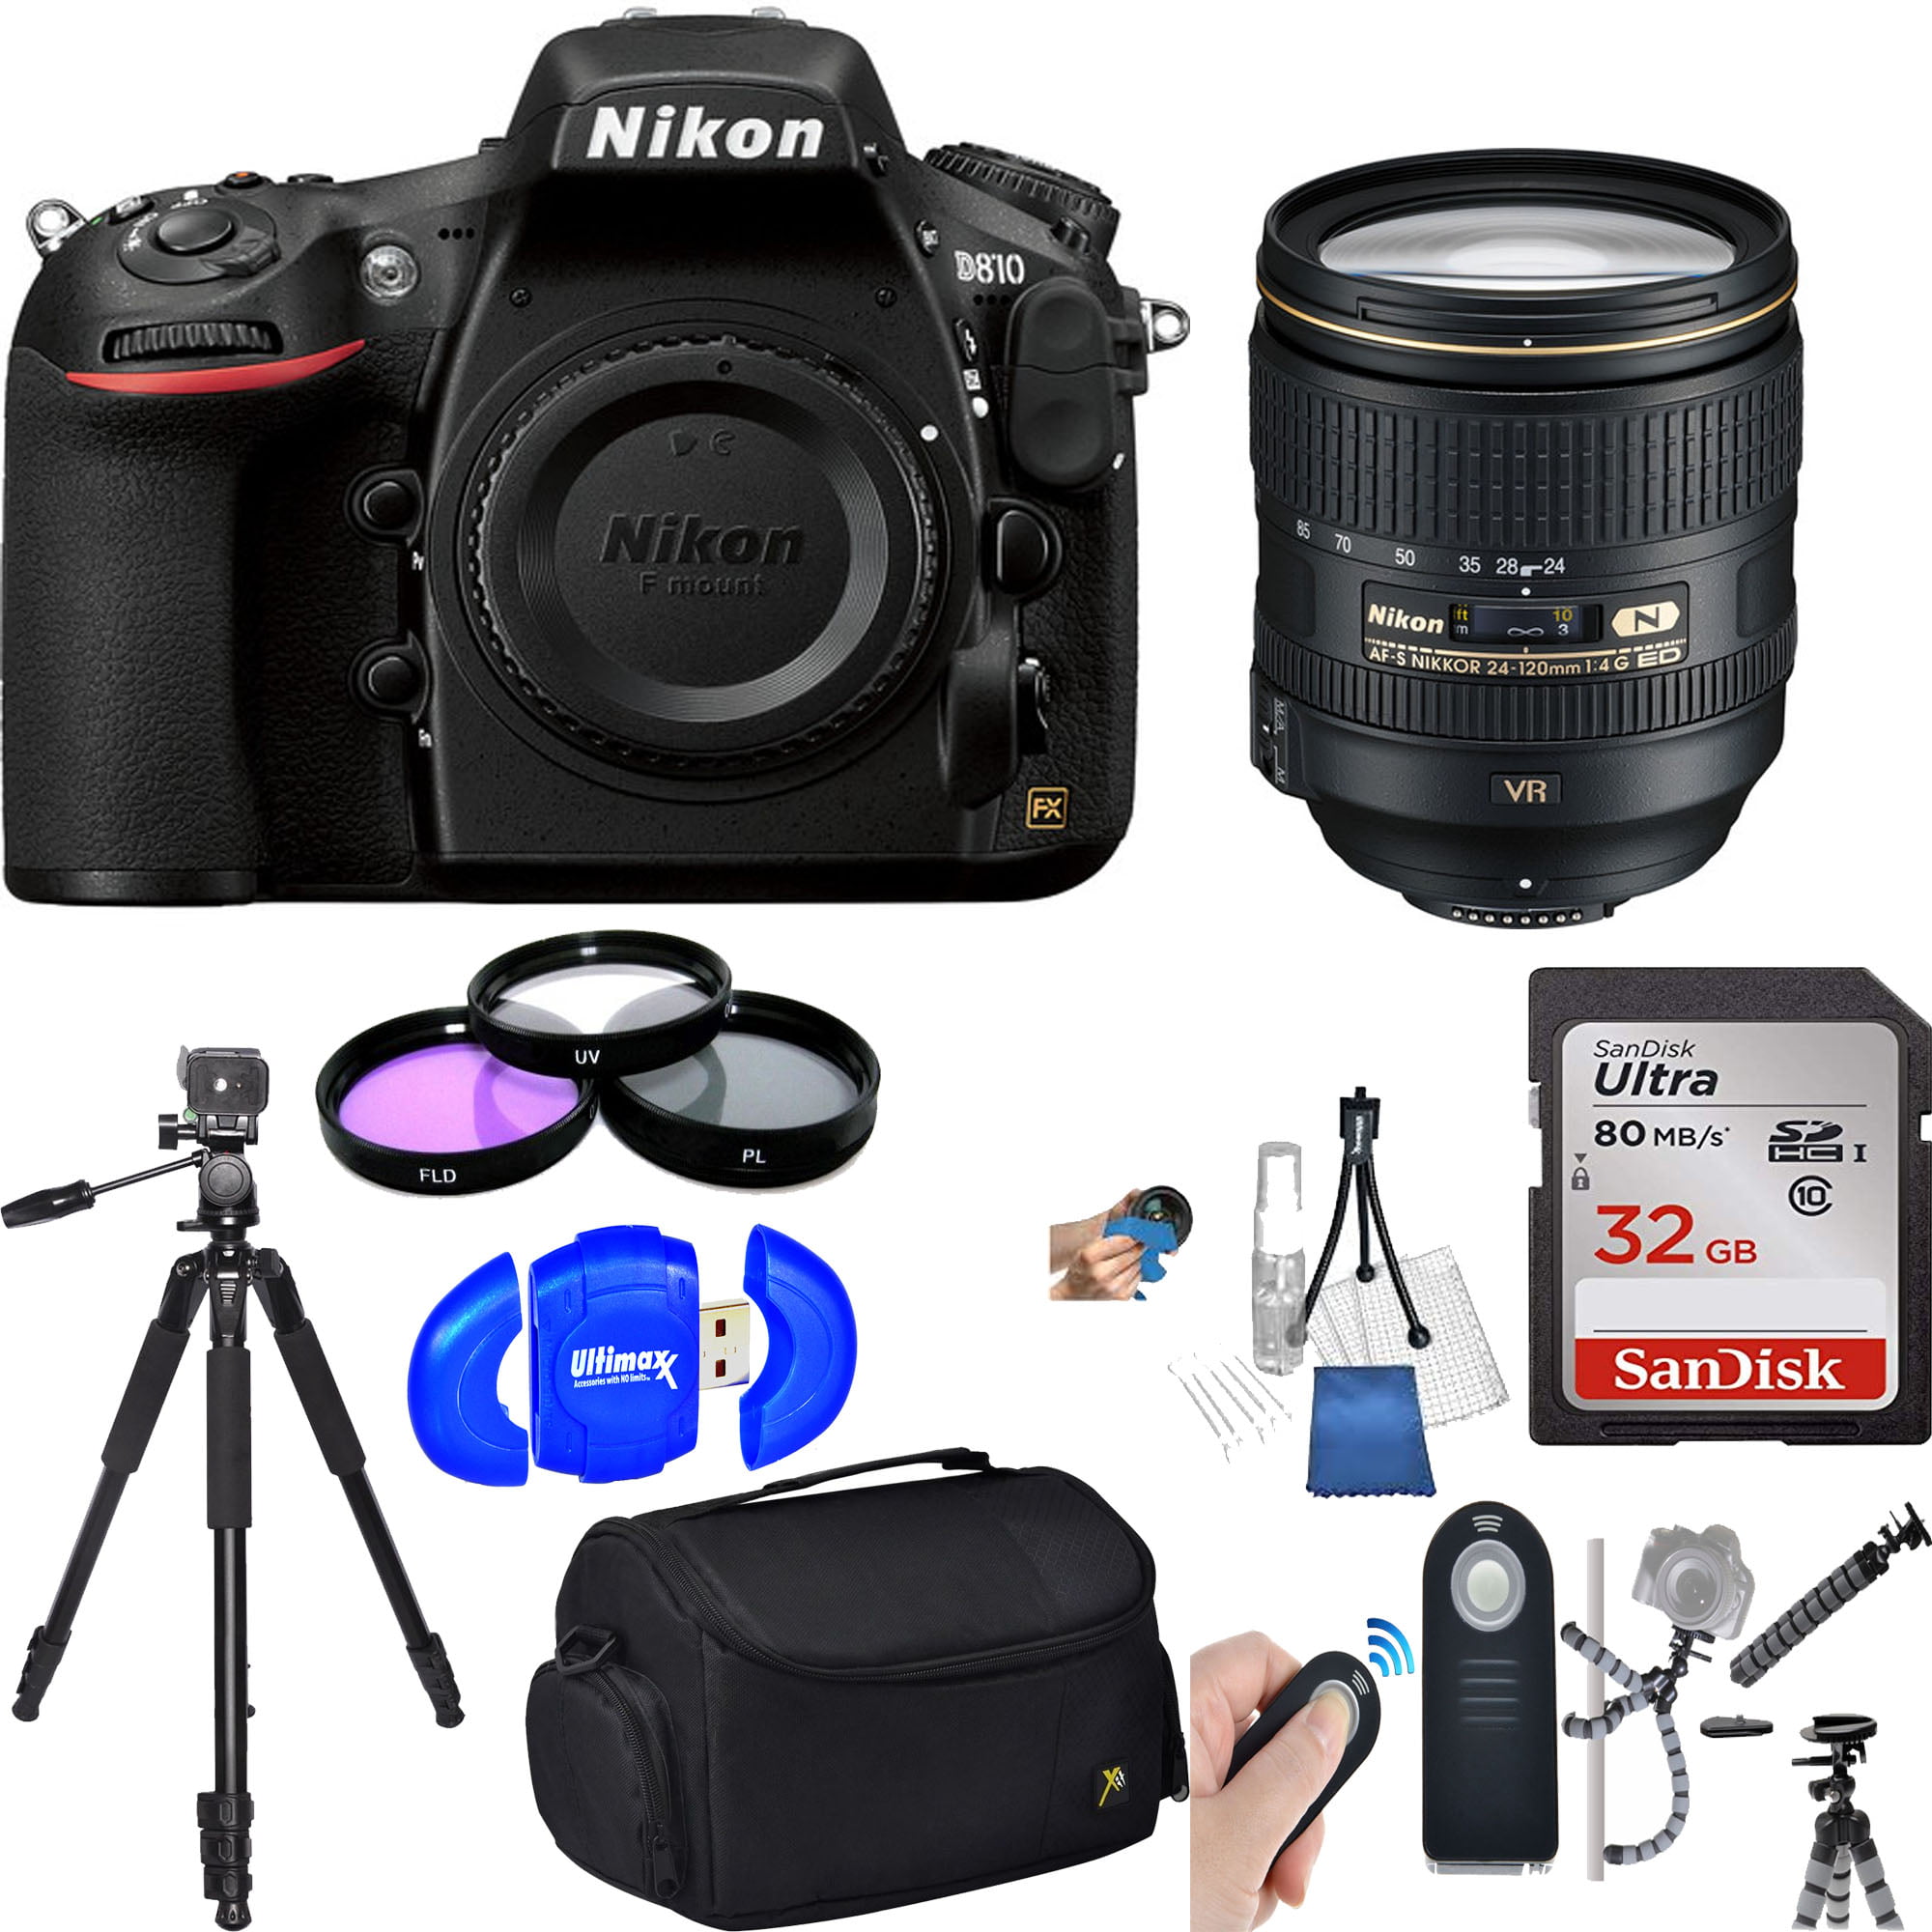 Nikon D810 DSLR with 24-120mm VR Lens with Additional Accessories